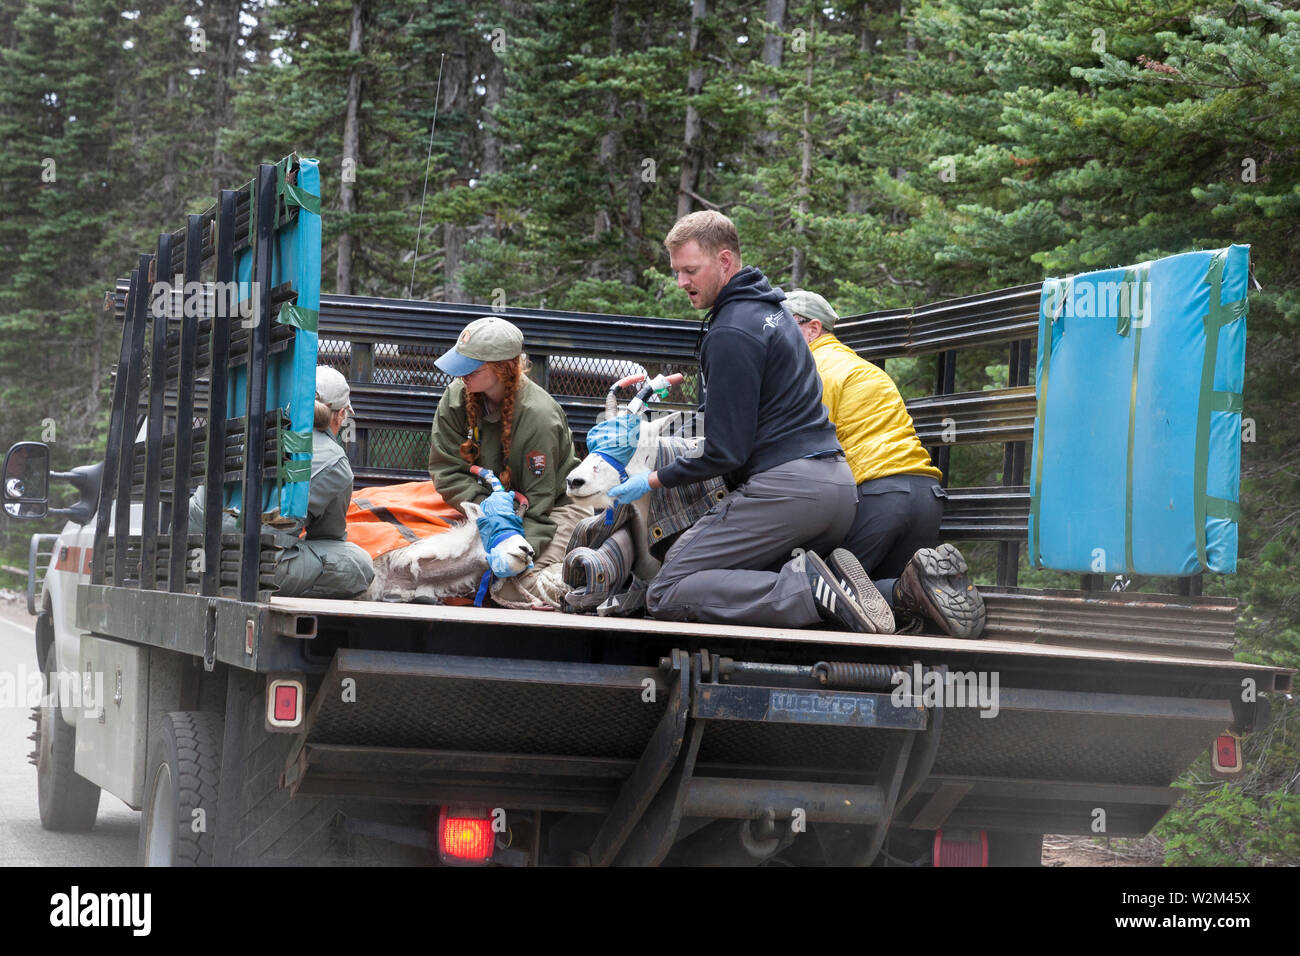 A team of rangers, employees and volunteers transport three tranquilized mountain goats during an airlift at Hurricane Ridge in Olympic National Park, Washington on July 9, 2019. Today is the second day of a two-week long capture and translocation process moving mountain goats from Olympic National Park to the northern Cascade Mountains. The effort is a collaboration between the National Park Service, the Washington Department of Fish & Wildlife and the USDA Forest Service to re-establish depleted populations of mountain goats in the Northern Cascades while also removing non-native goats from Stock Photo